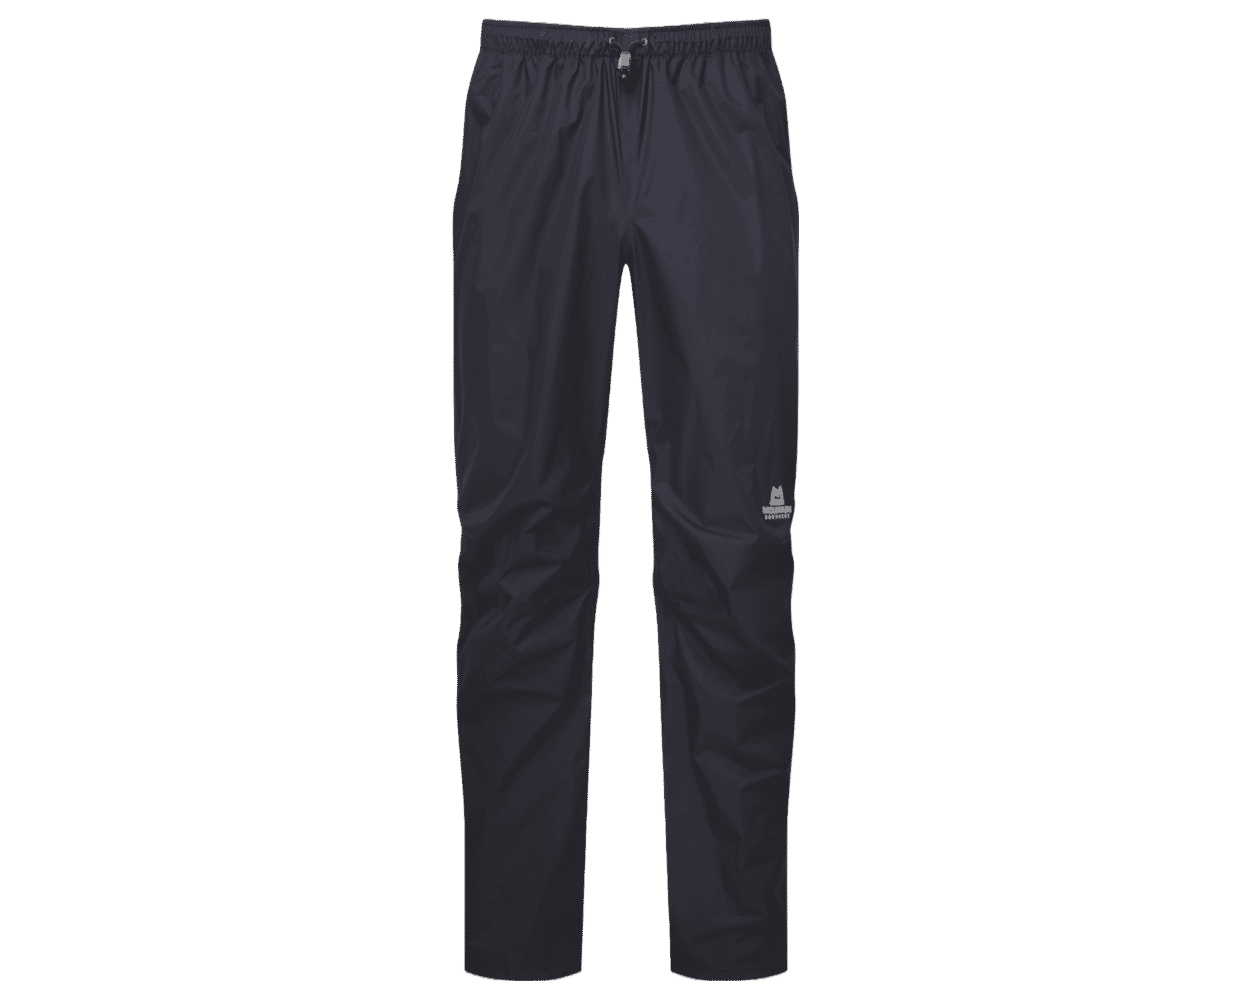 Dihedral Women's Pant